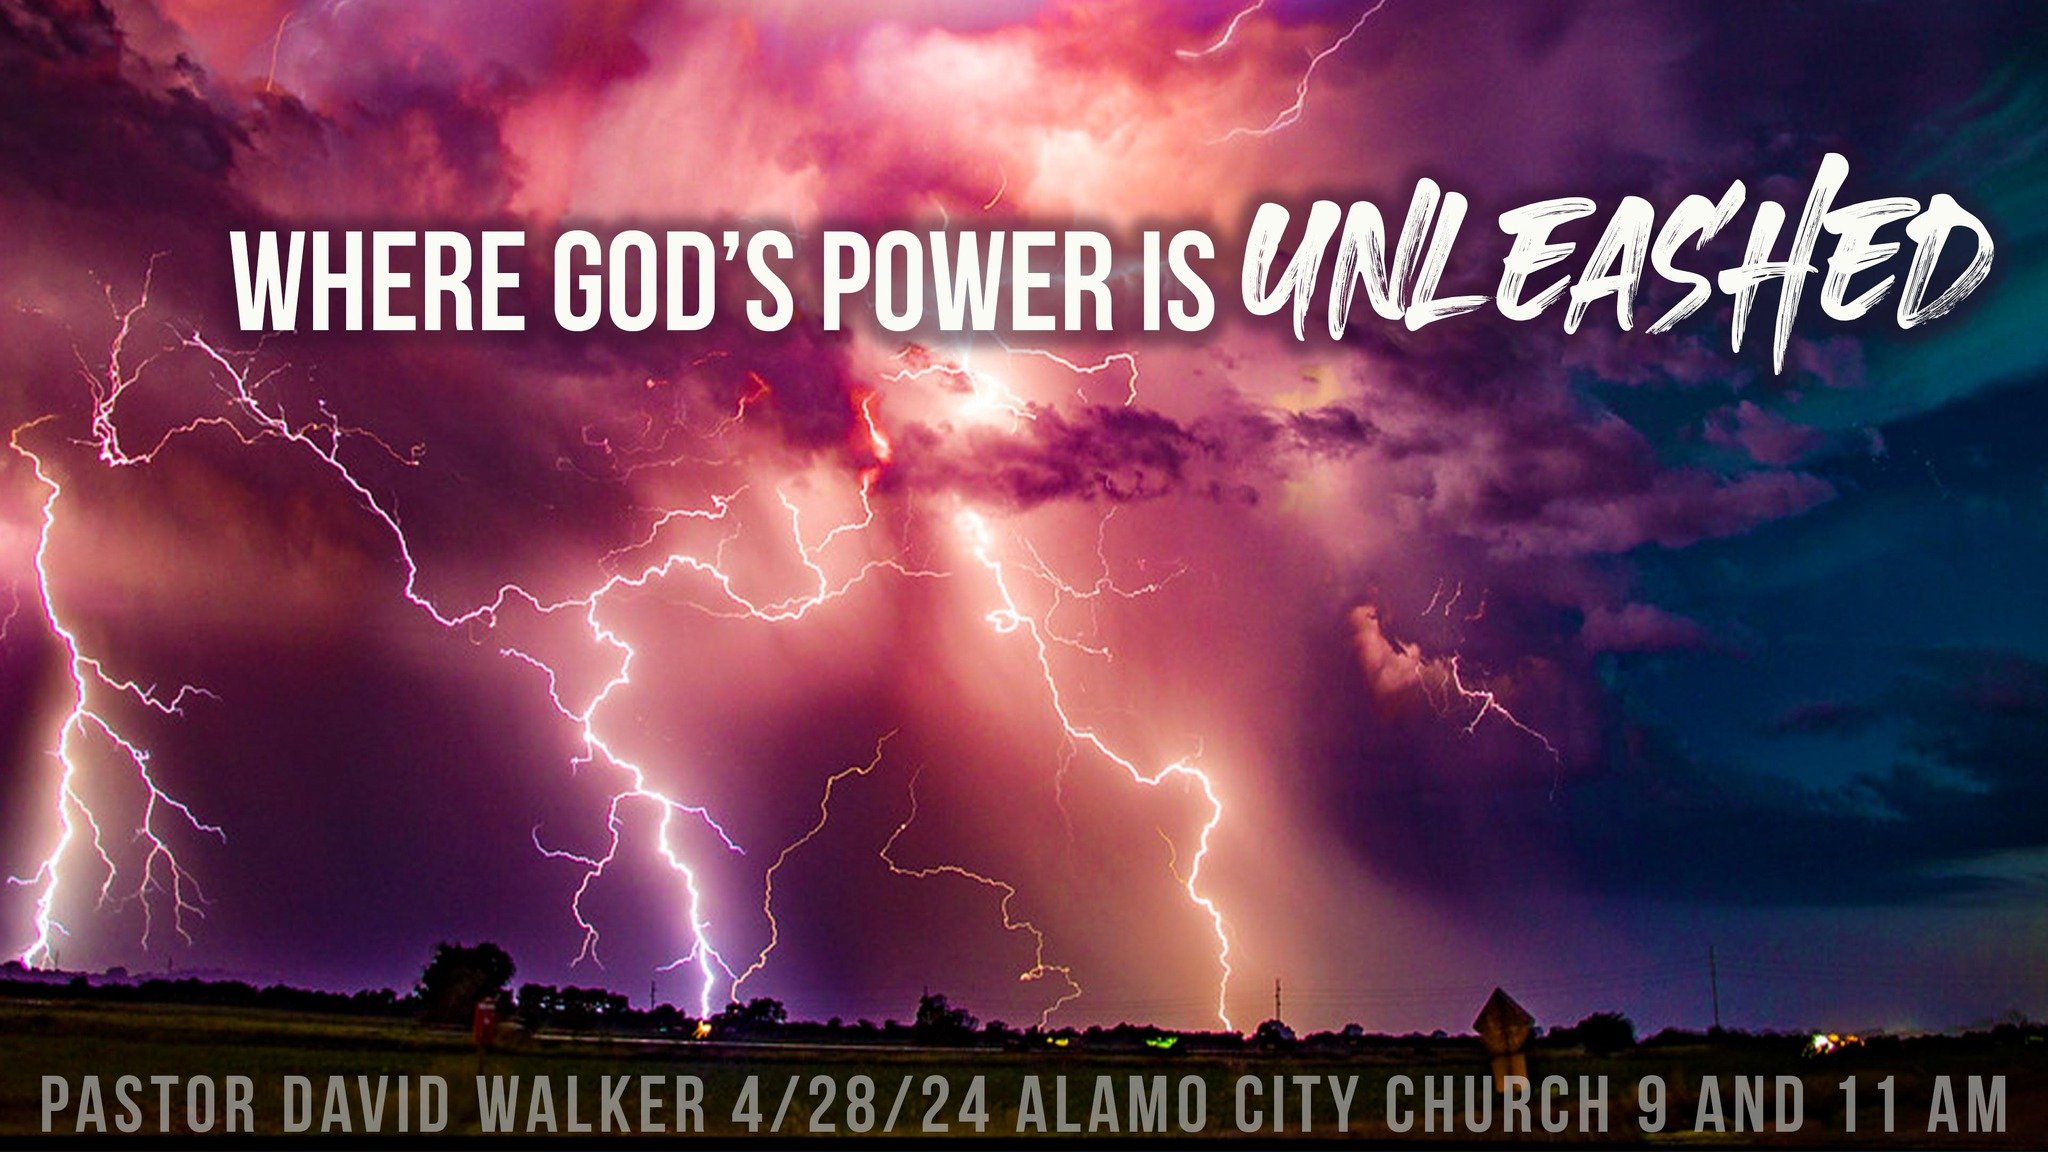 Join us TOMORROW at Alamo City!
We are thrilled to have Jillian Warman back with us to lead us into GOD'S presence tomorrow with our worship team.
Pastor Walker will share a powerful message-&quot;Where God's Power Is Unleashed&quot;
We have been pra